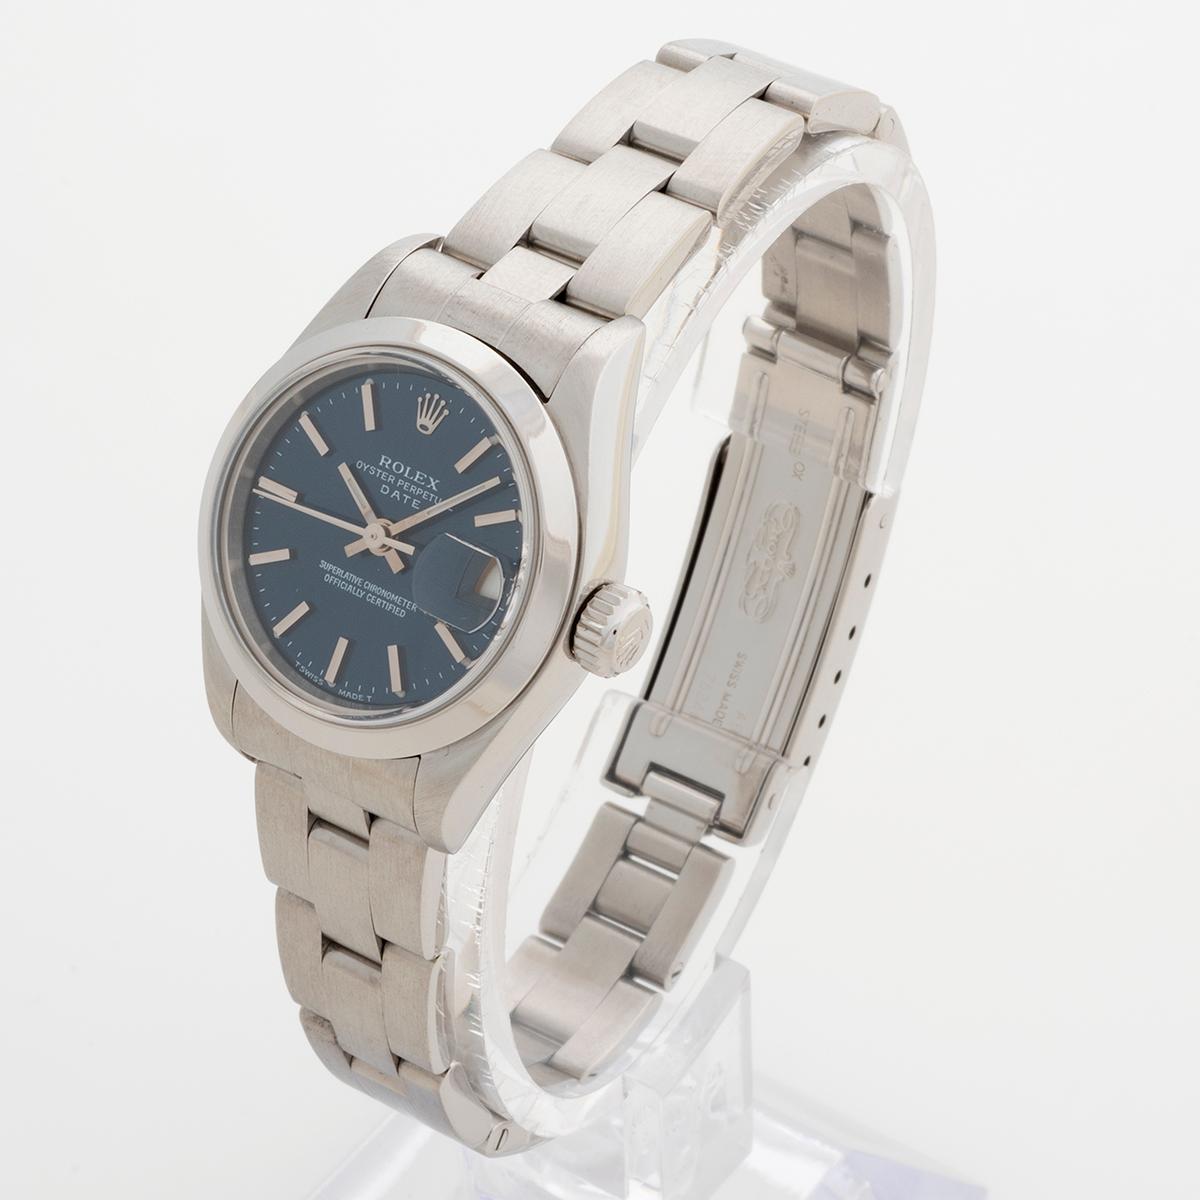 Women's or Men's Rolex Lady Date Ref 79160, Denim Blue Dial, Box & Papers, Outstanding Condition